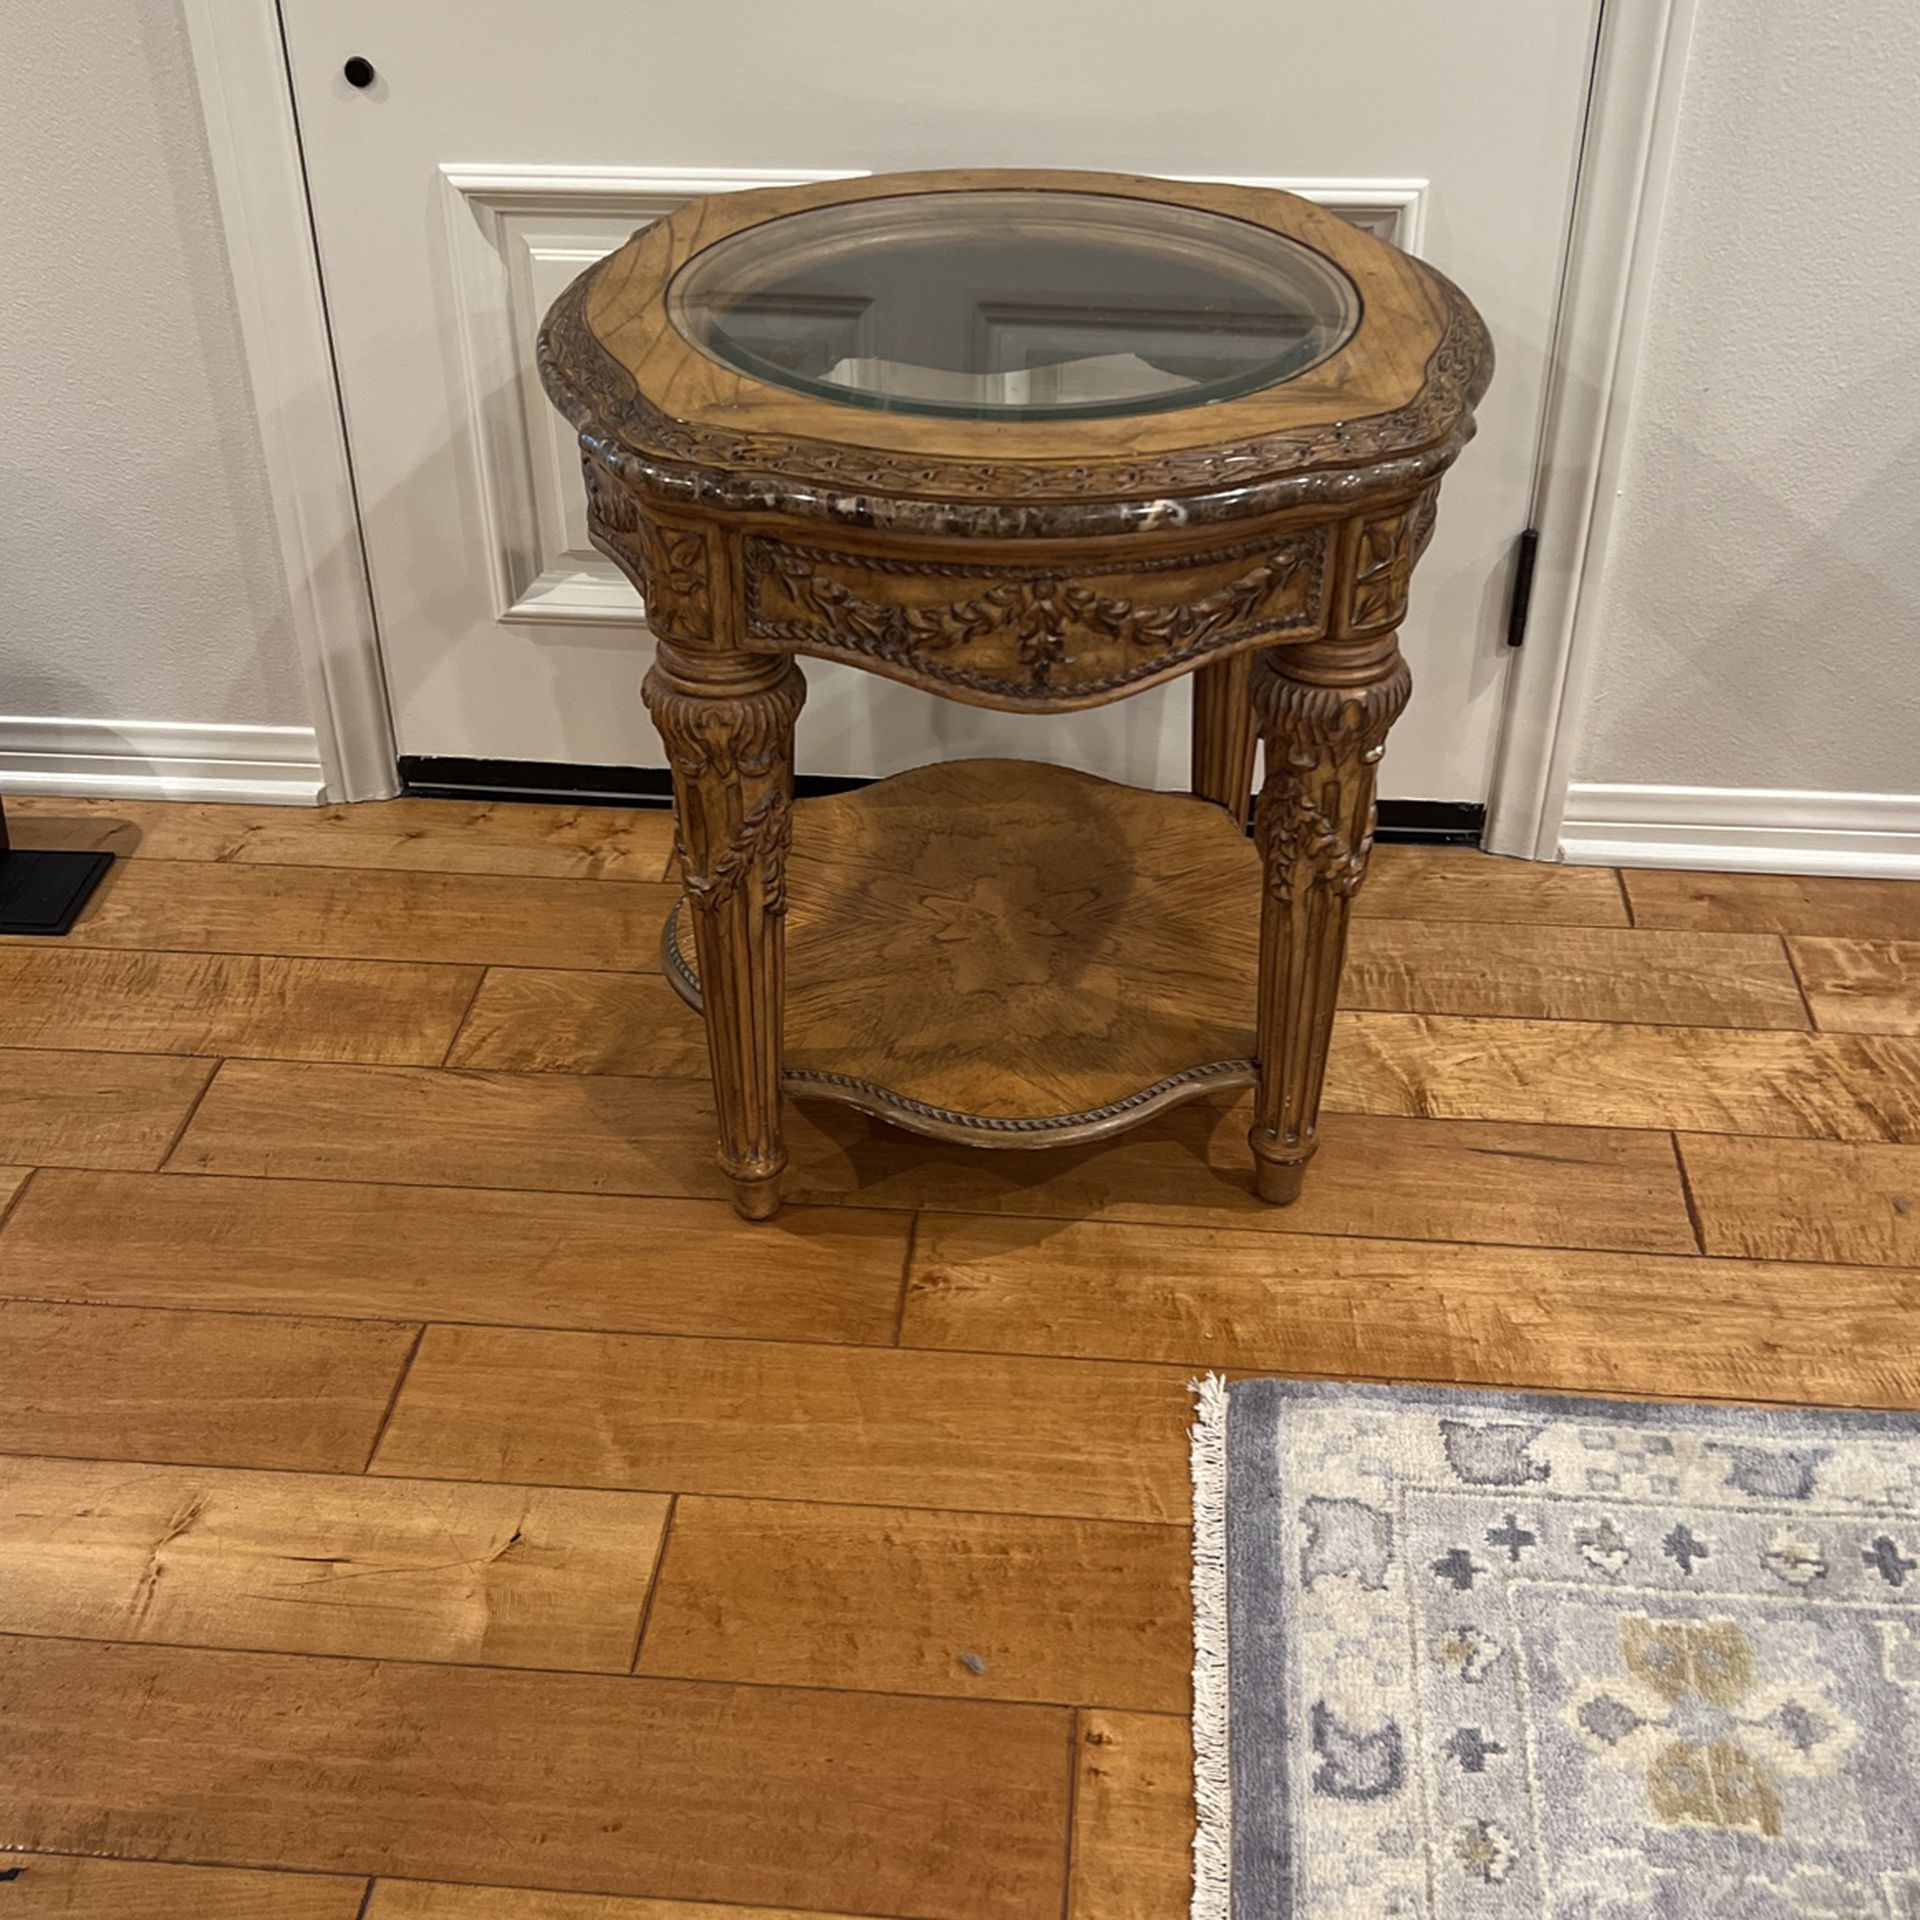 End Table For Living Room . First Person To Come Get It, Free. Need To Be Gone By This Weekend. 